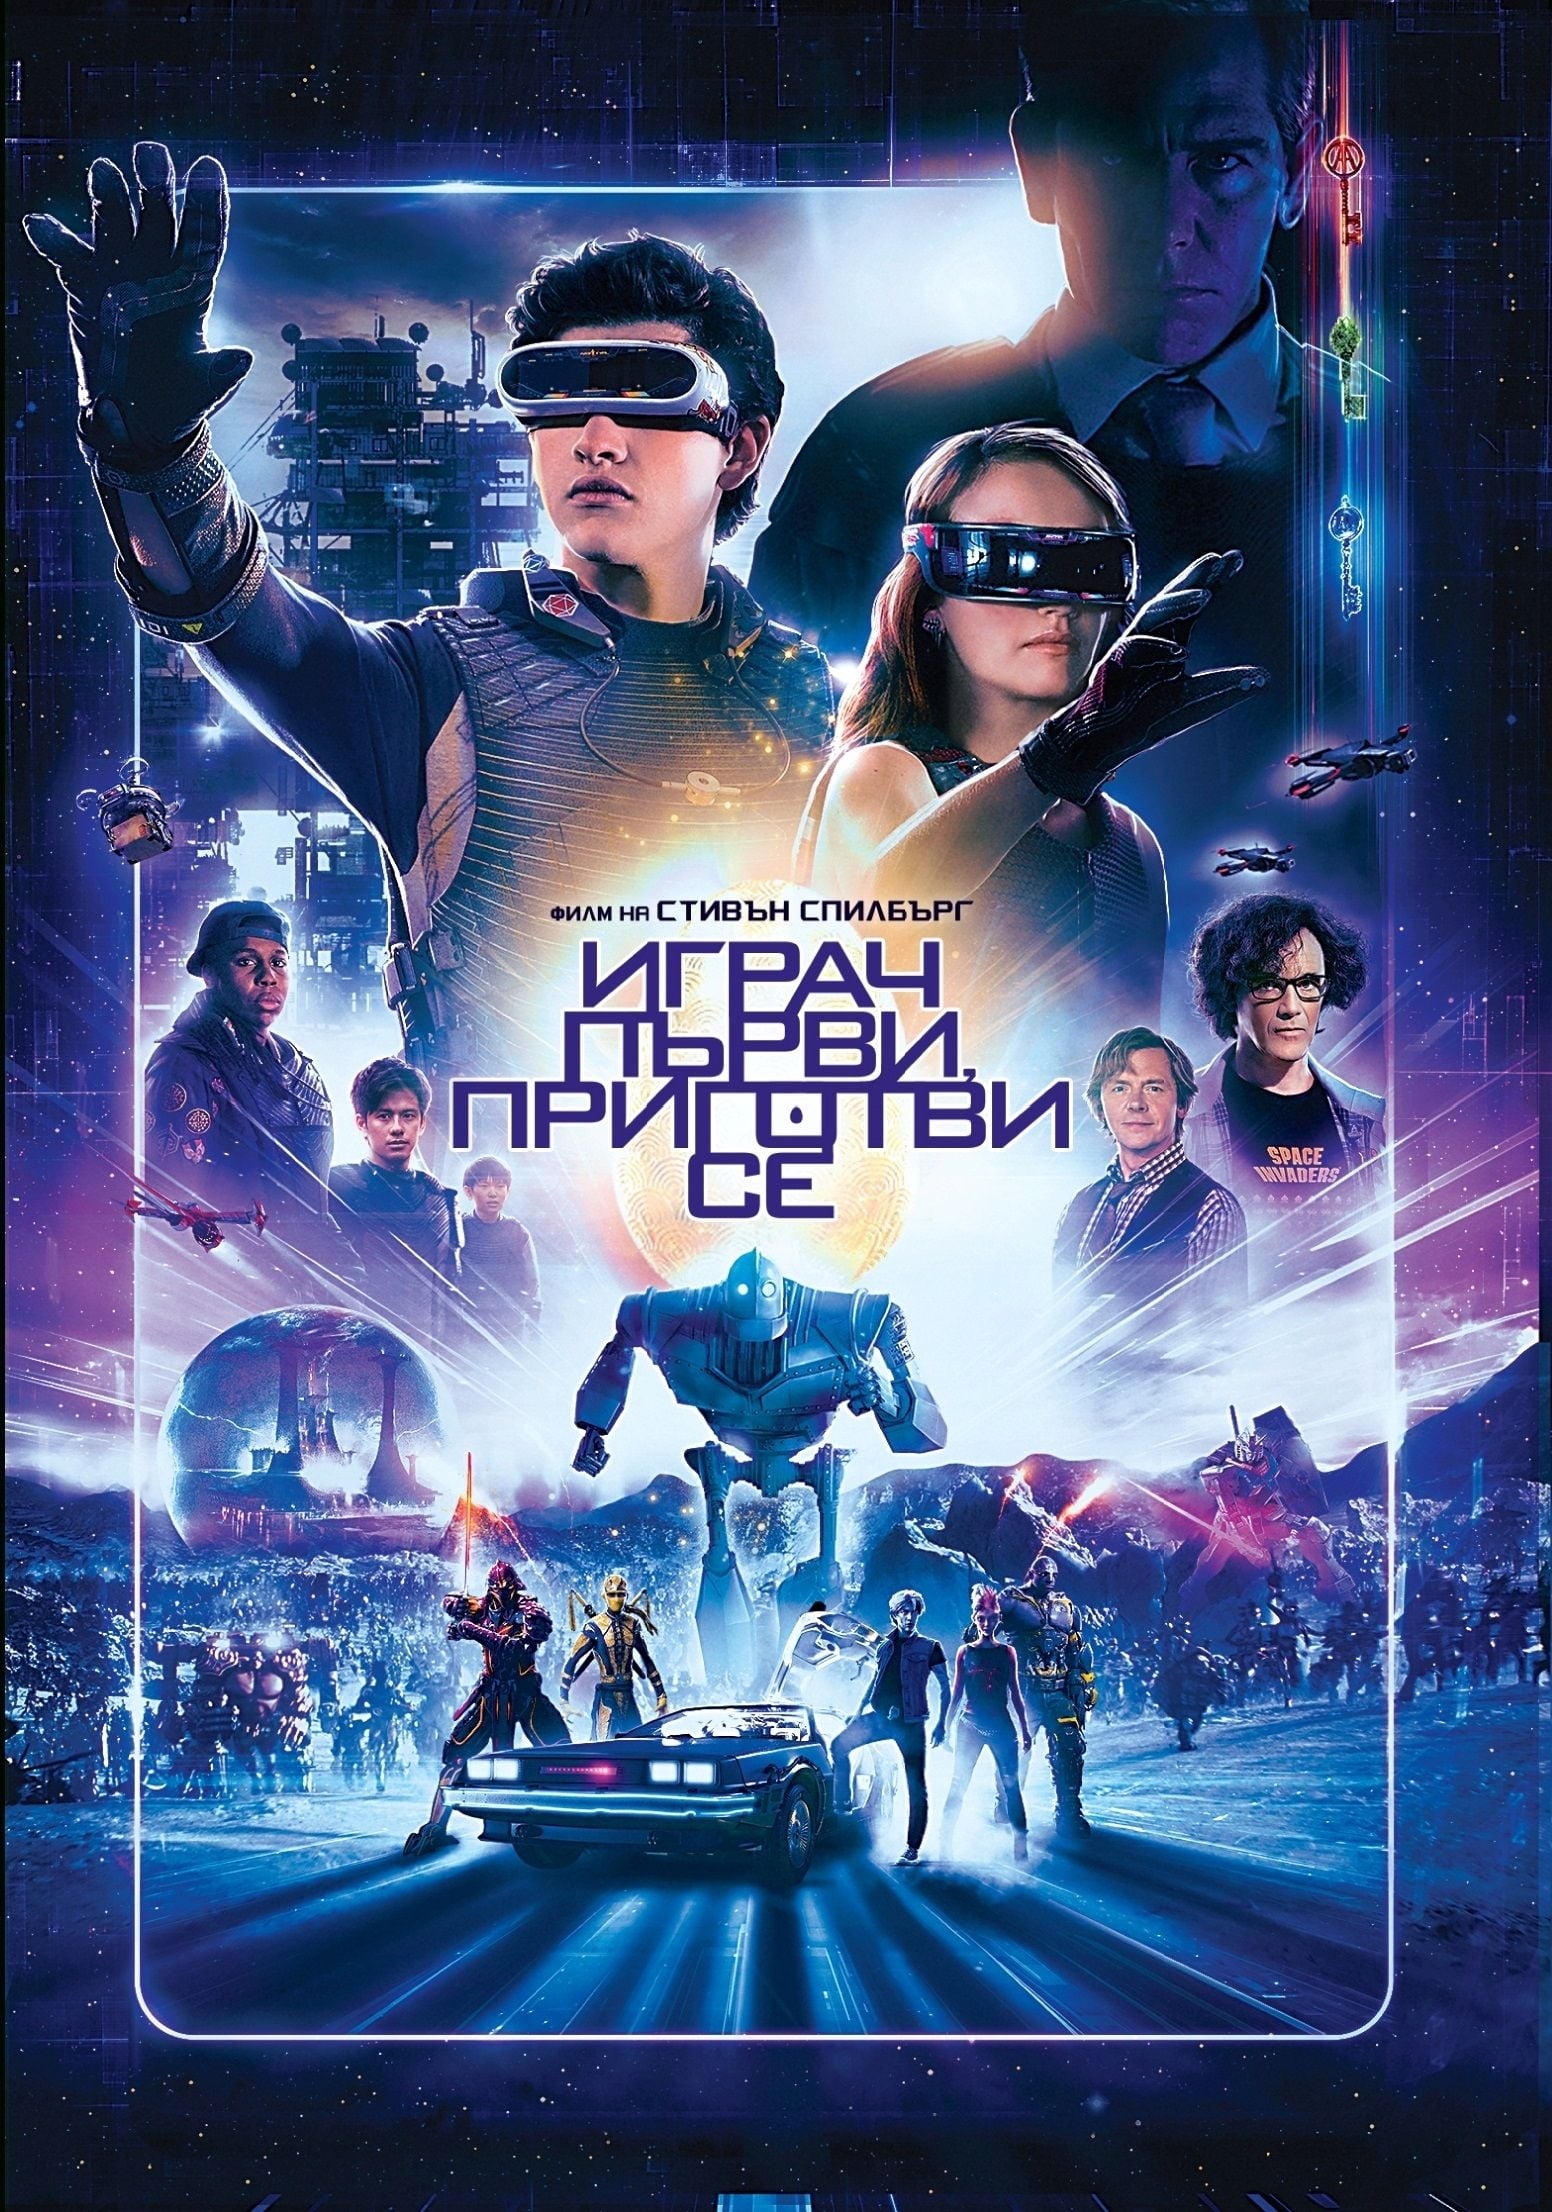 Ready Player One (2018) Streaming VF Film Complet en Français